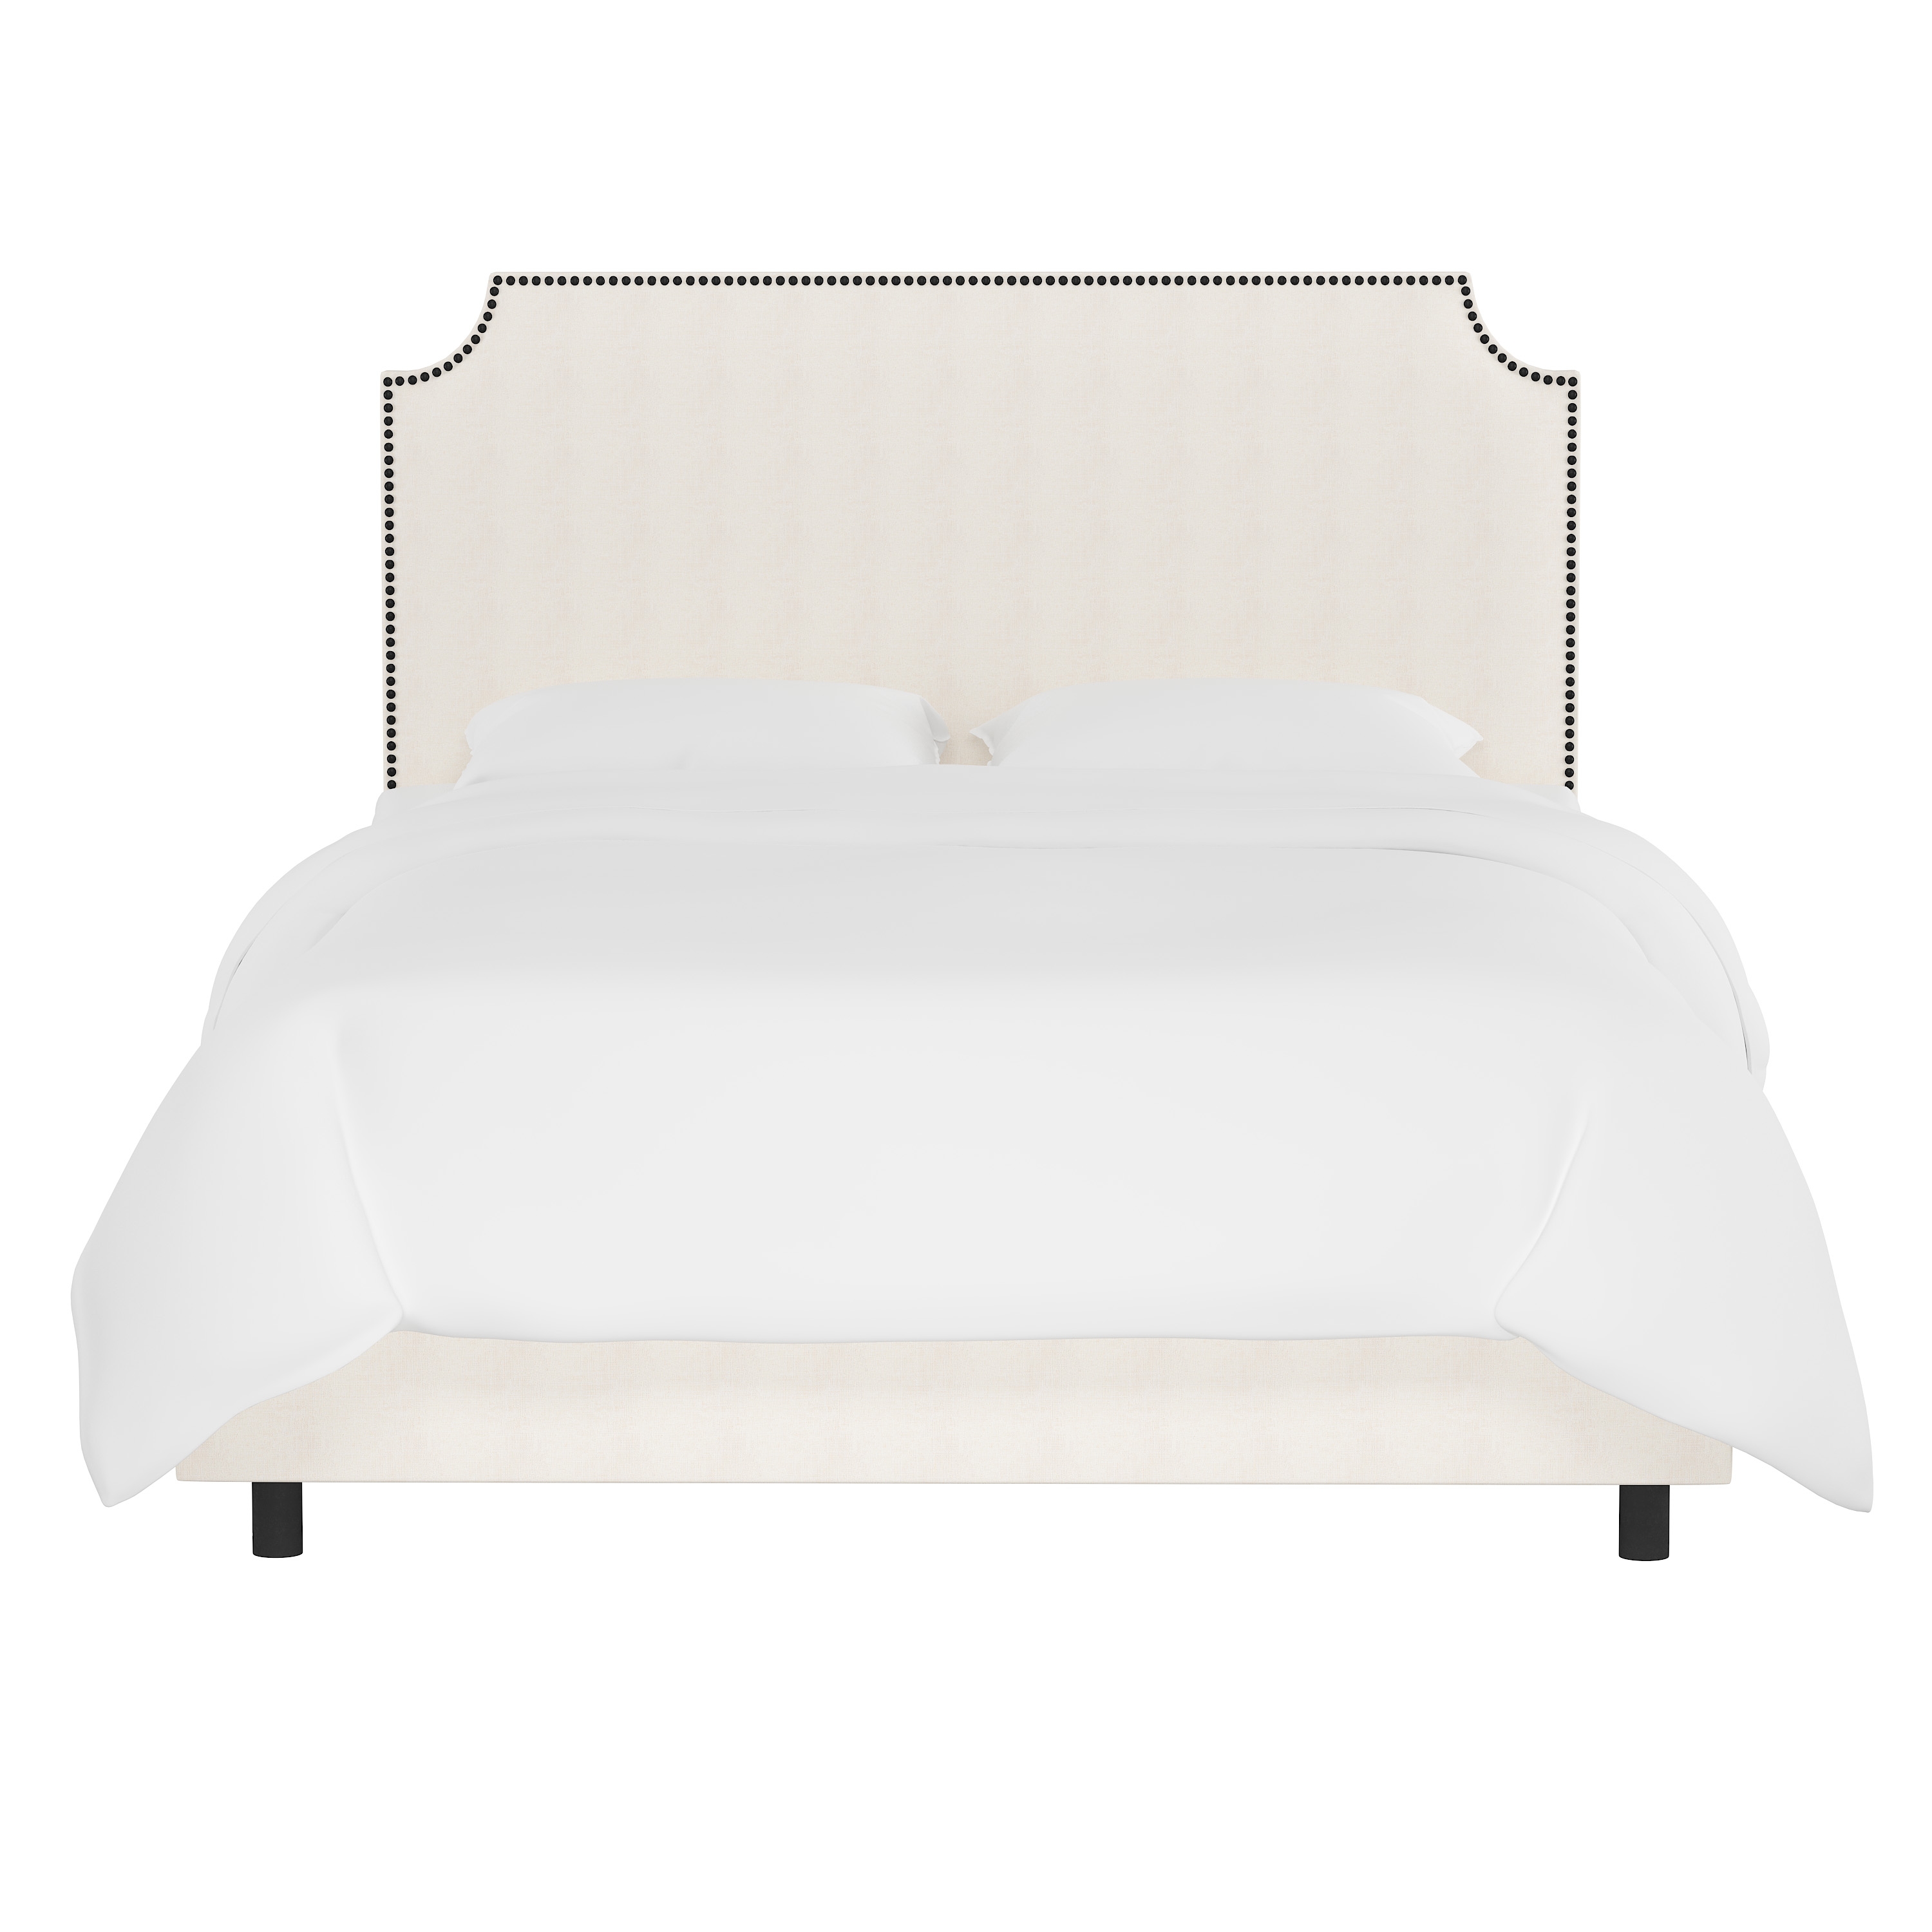 Hudson Bed, Queen, White, Black Nailheads - Image 1